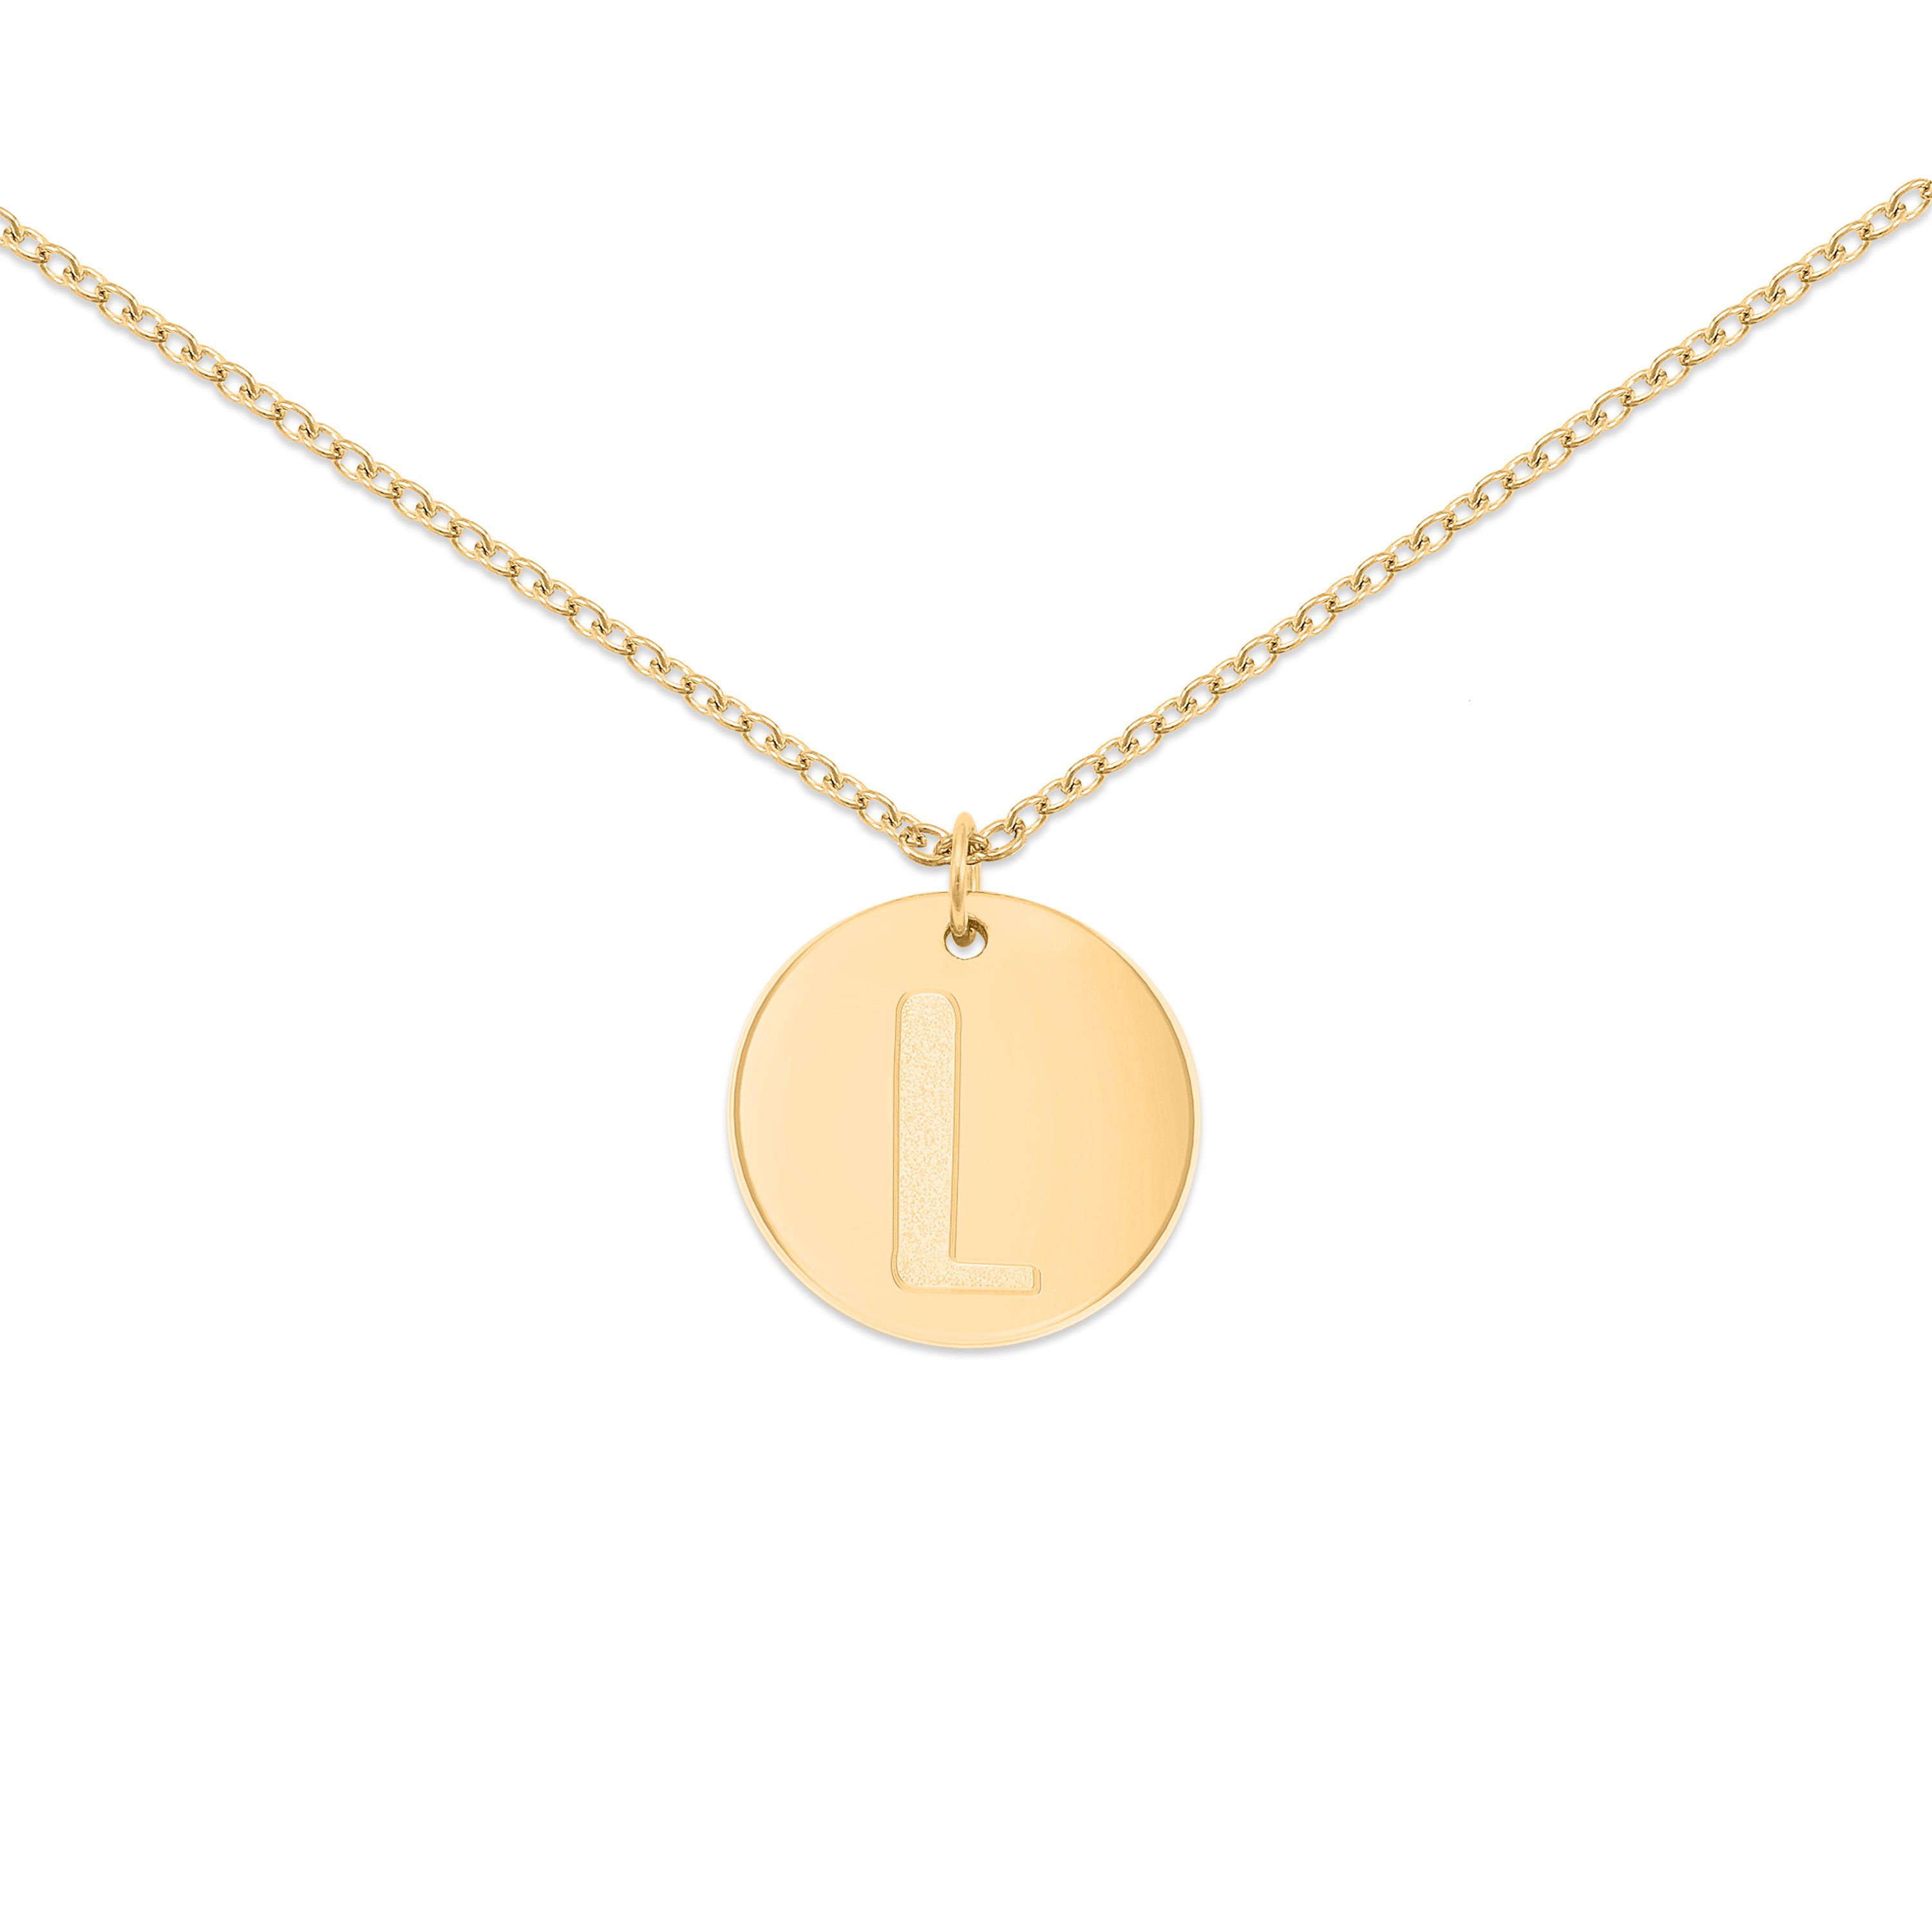 Frau Hoelle With Regard To Latest Letter L Alphabet Locket Element Necklaces (View 3 of 25)